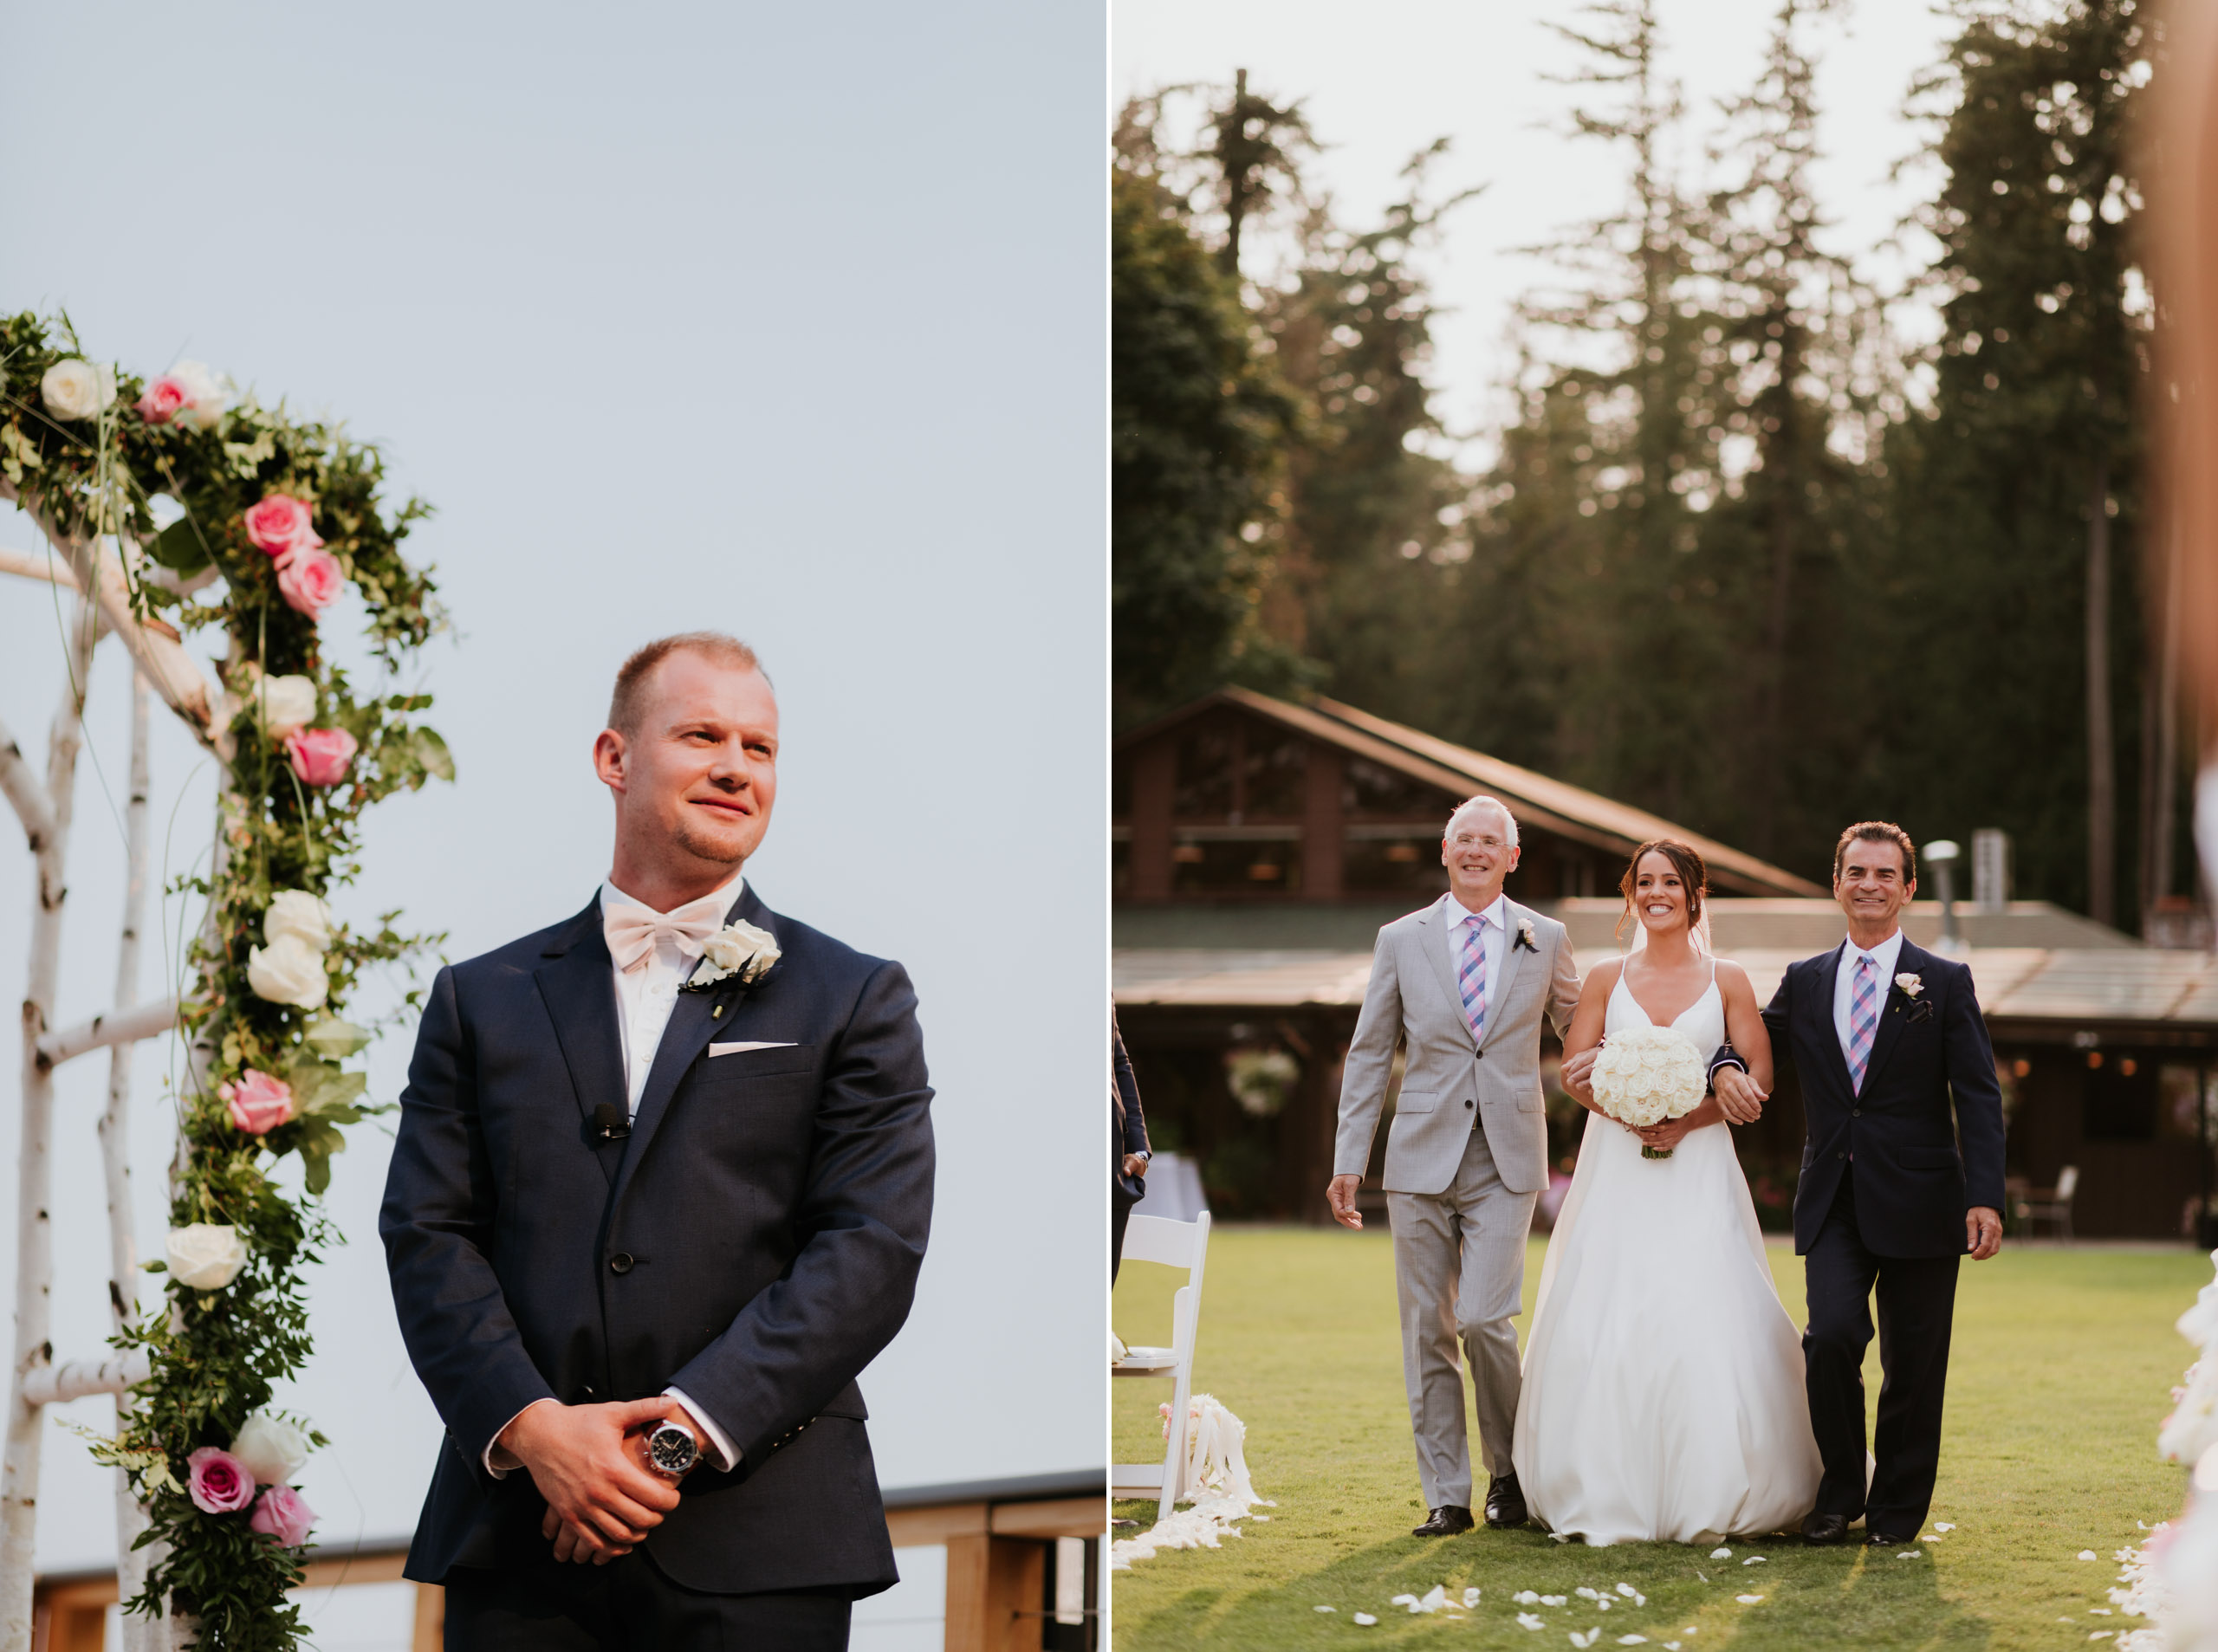 https://breannapluskevin.com/wp-content/uploads/photo-gallery/imported_from_media_libray/kiana-lodge-wedding-bm-breanna-plus-kevin-33.jpg